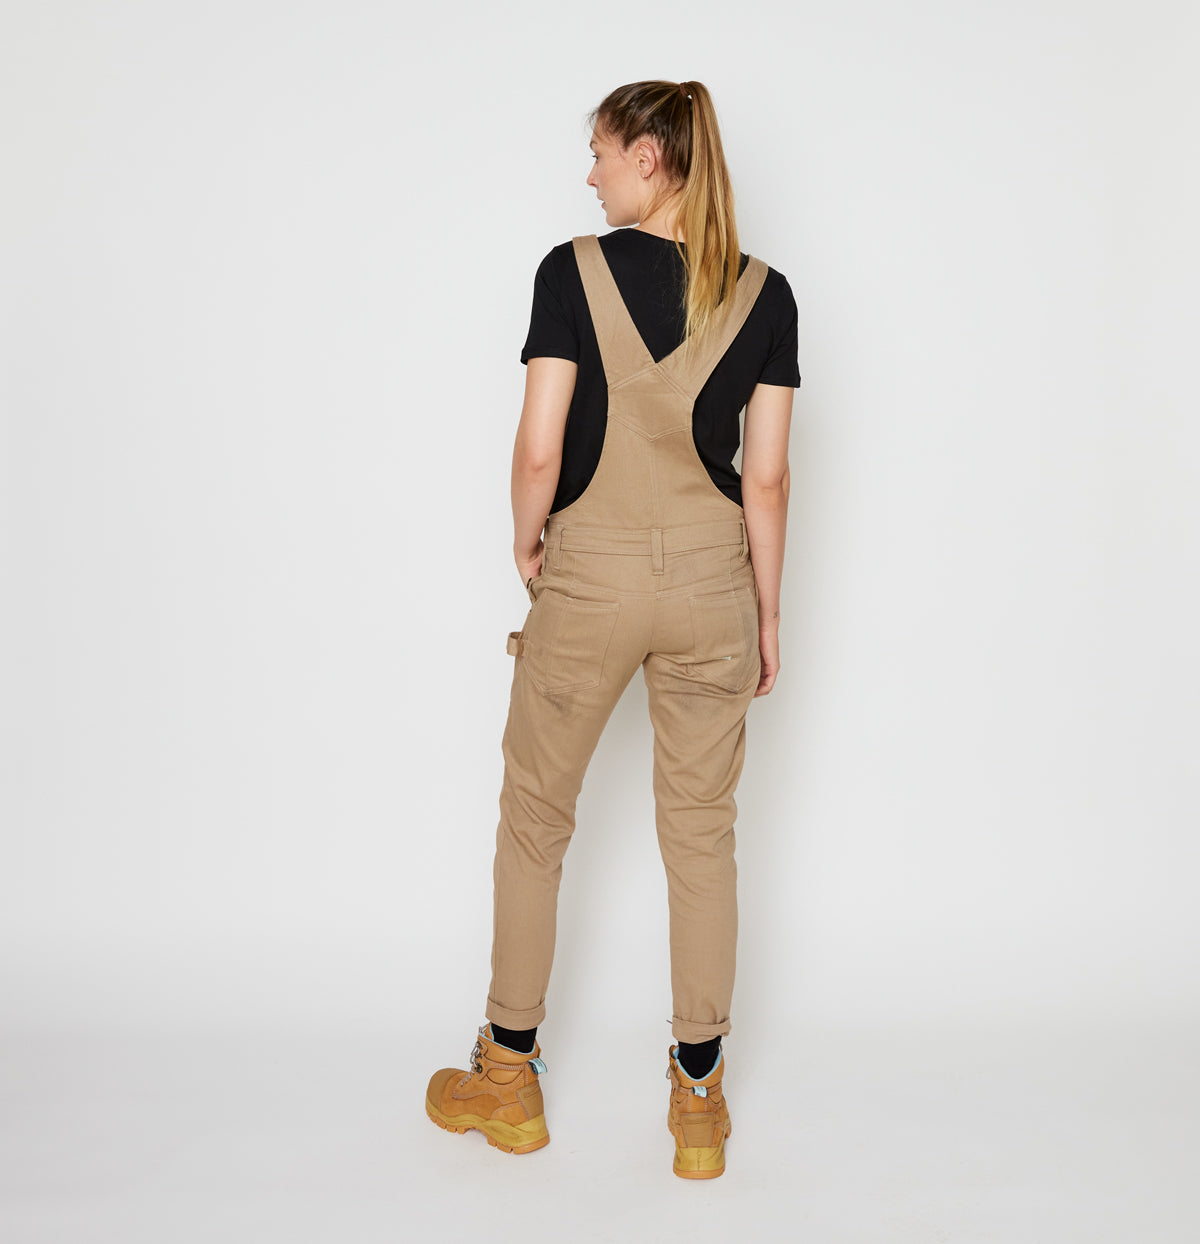 2607 Overalls/Dungarees - Sand